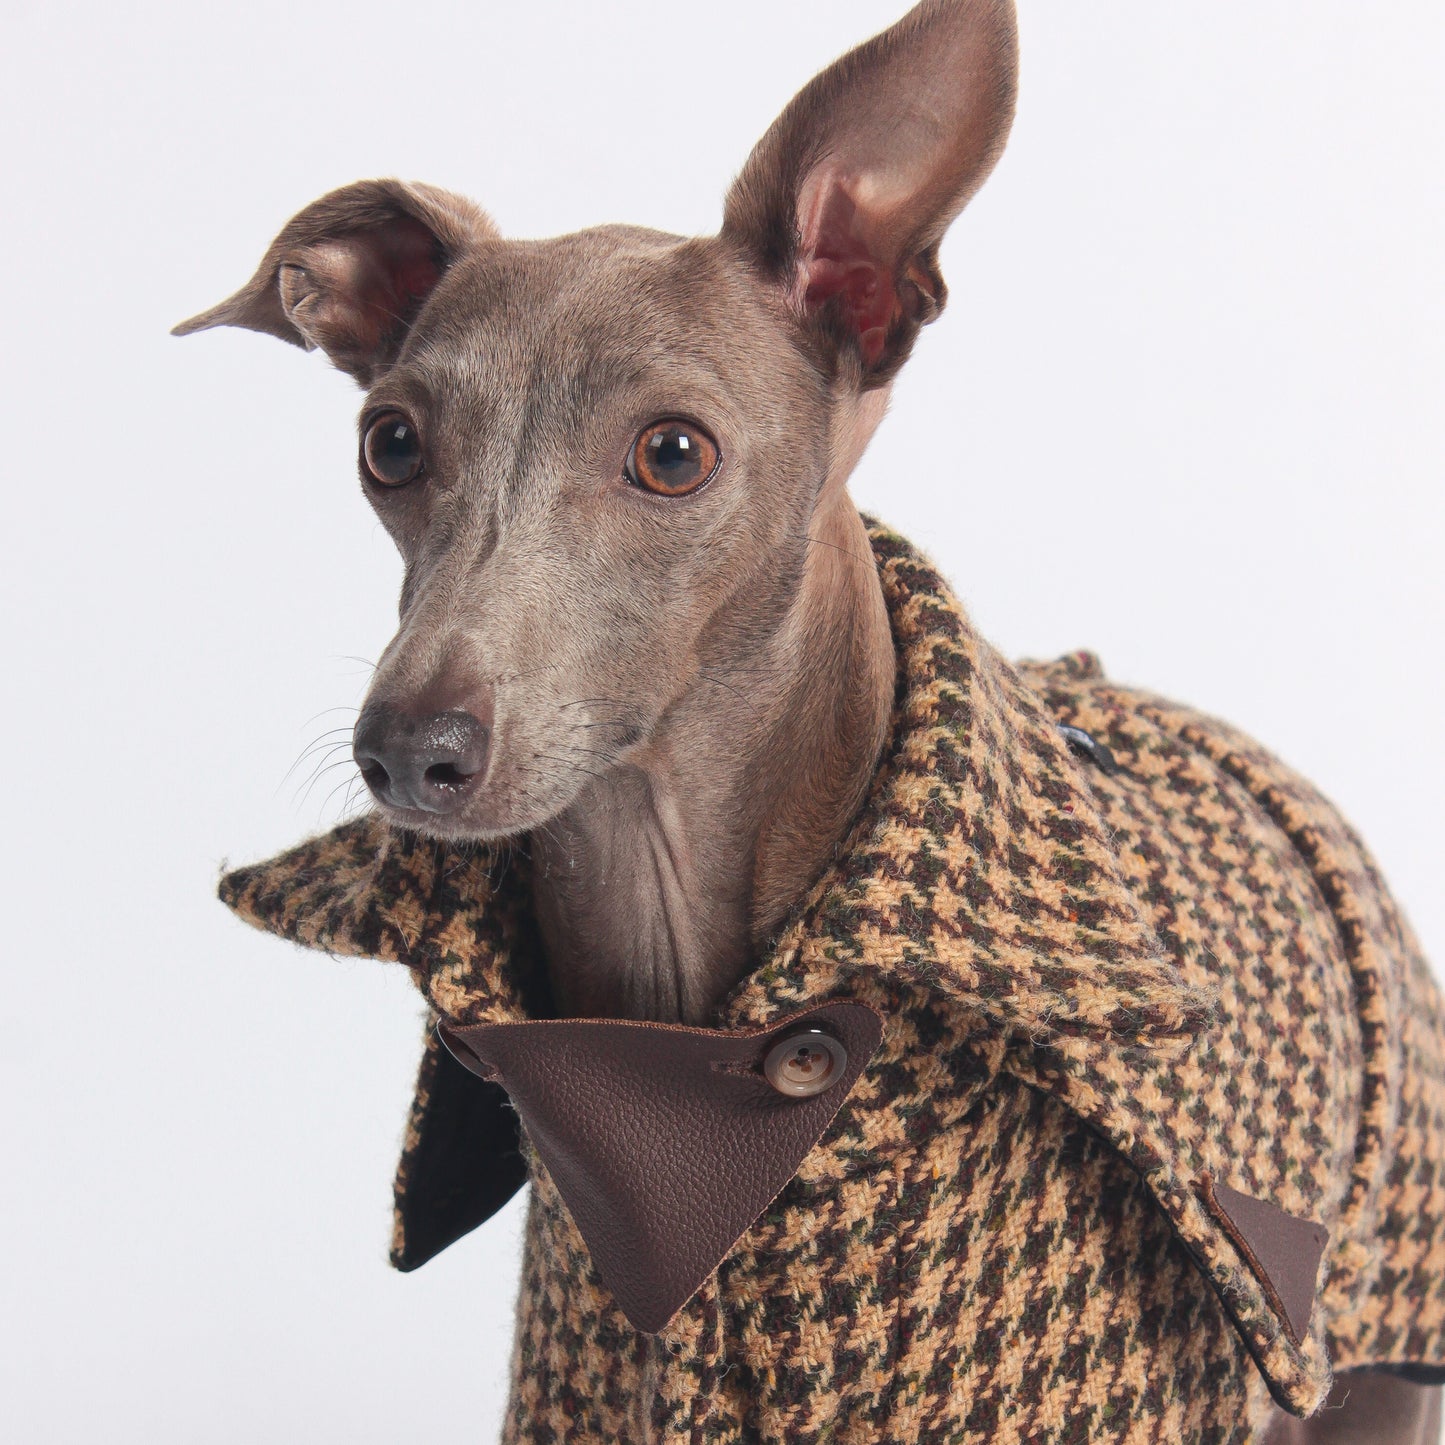 Luxury dog clothing for Italian Greyhounds and Whippets. 100% wool trench coat for iggies.